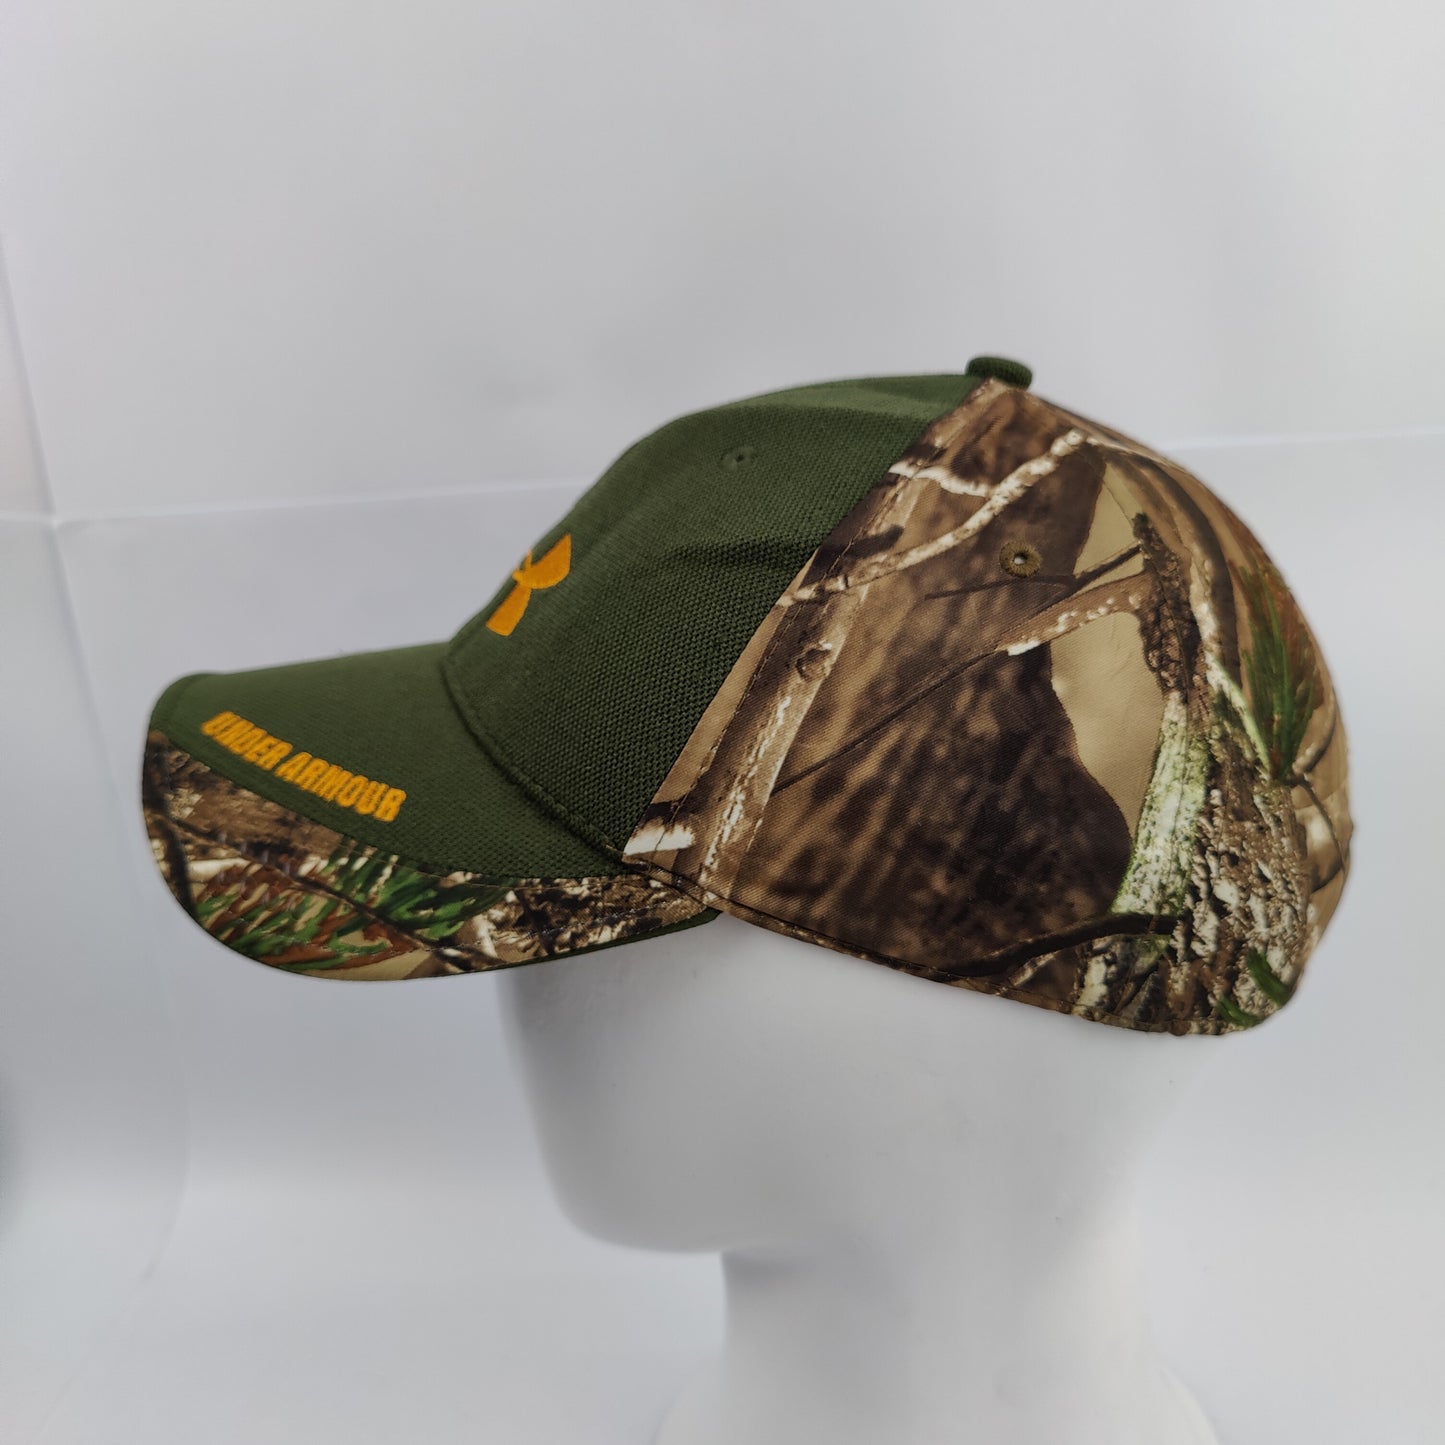 Under Armour RealTree Rimfire Fitted Cap - Green/Camo - 1039